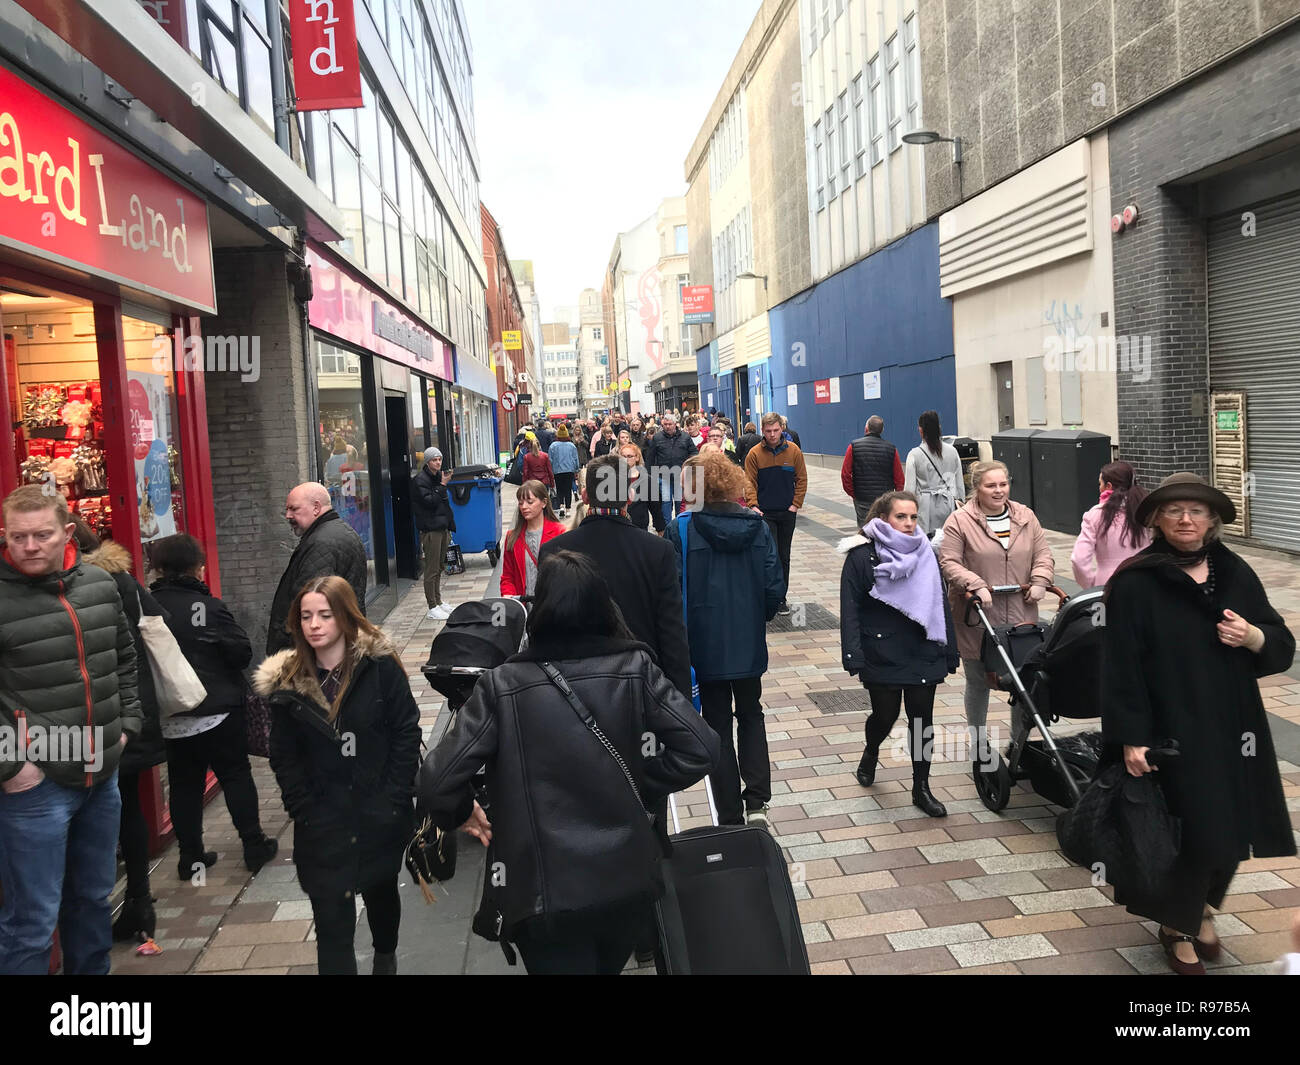 Shoppers in Belfast city centre where despite the restrictions still in place due to August's Primark fire the city centre has been busier this Christmas shopping season. Stock Photo